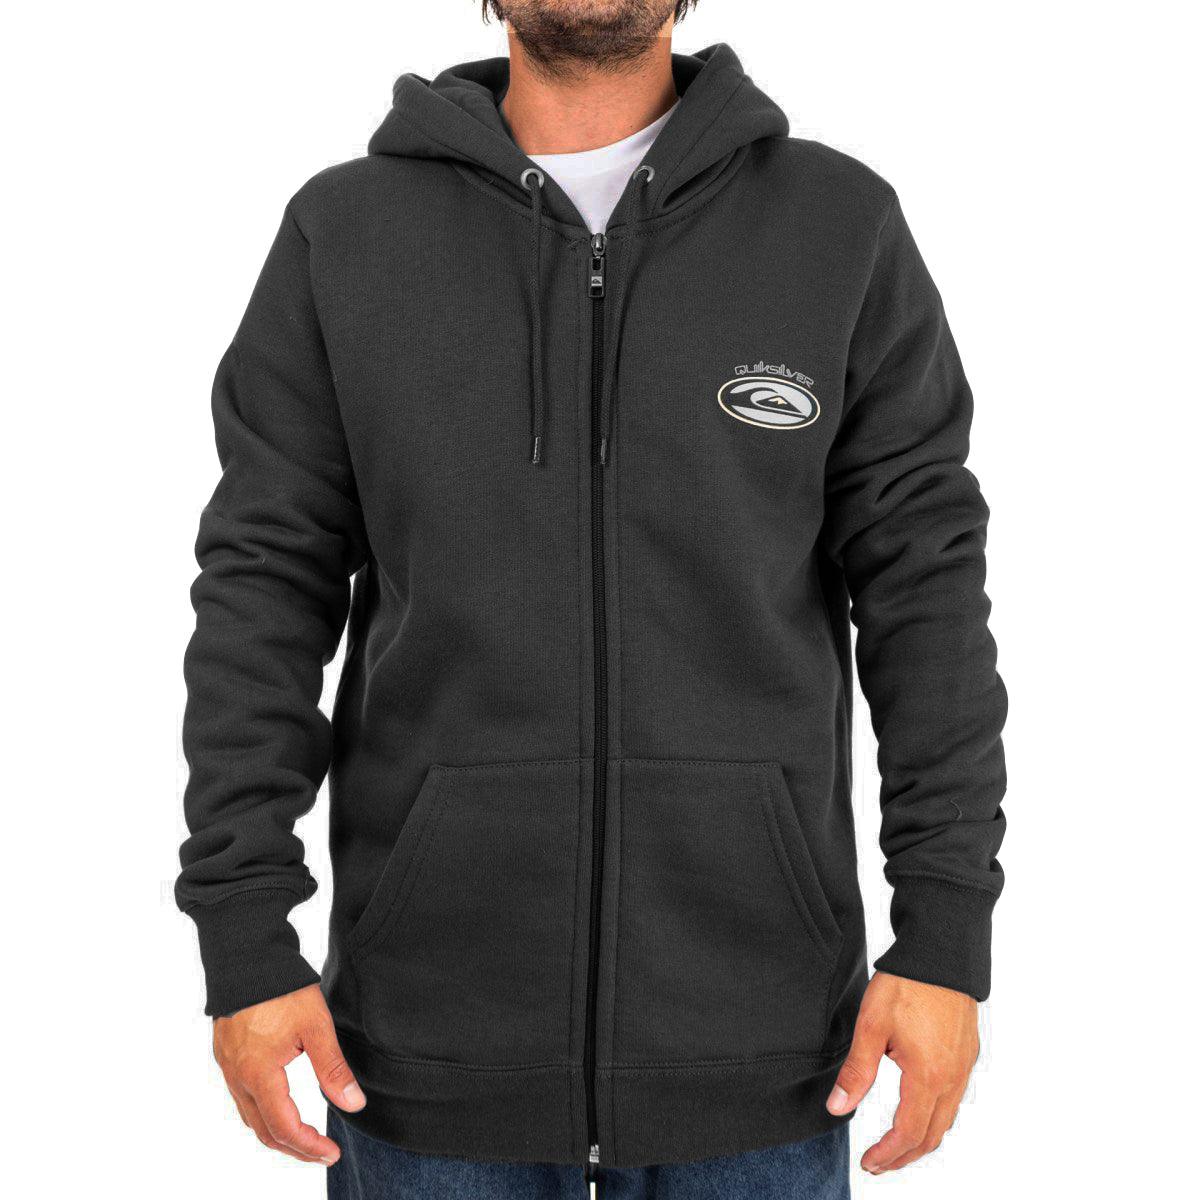 Campera Quiksilver Heritage Oval Negro - Indy